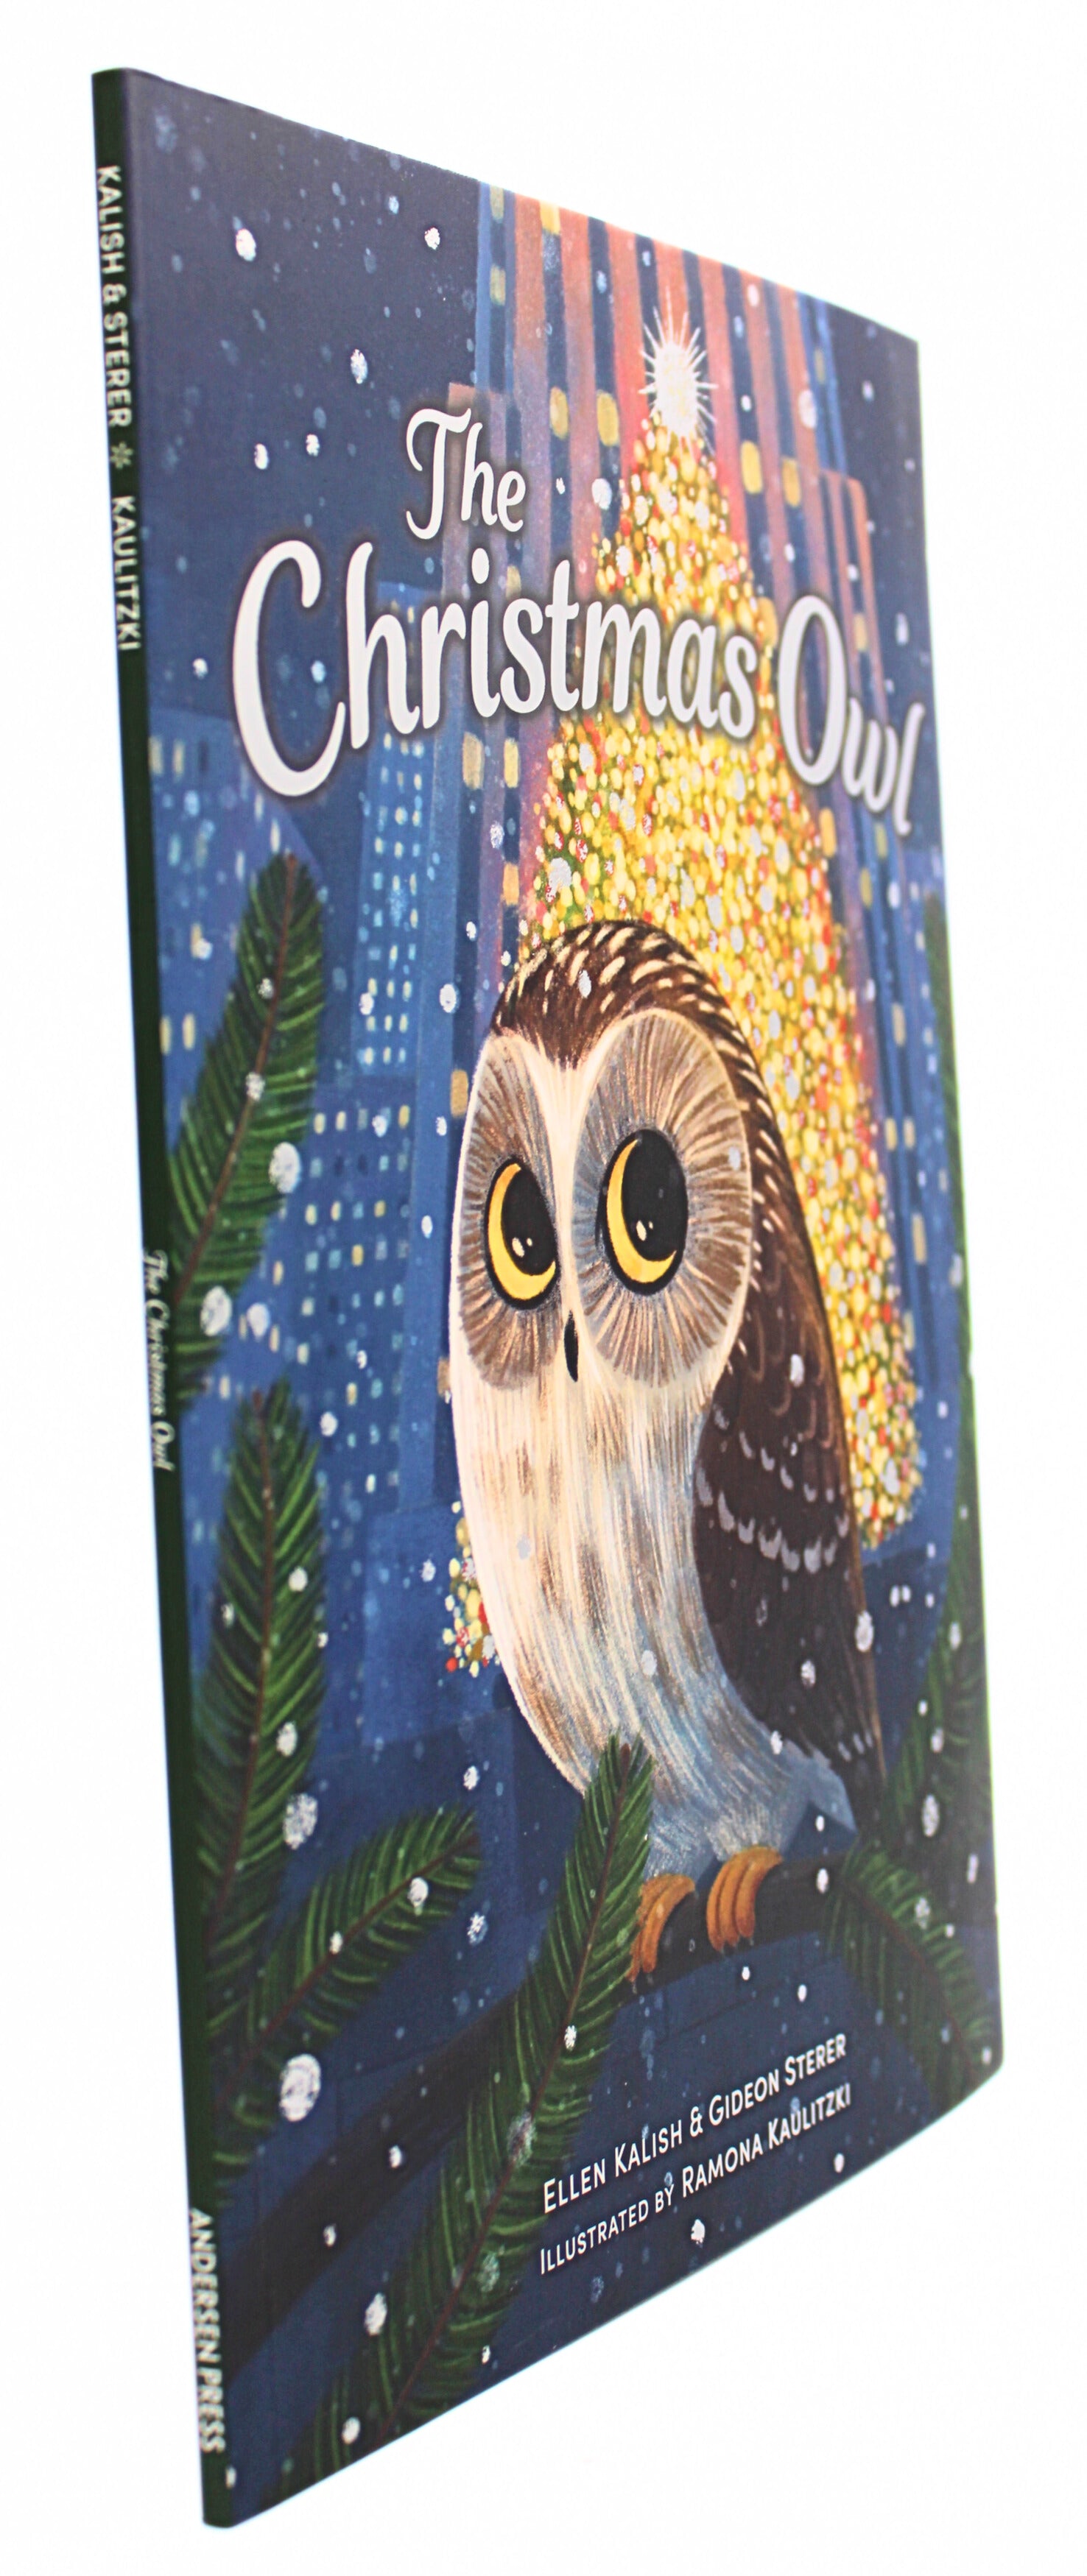 Side View of the Christmas Owl Book by Ellen Kalish and Gideon Sterer